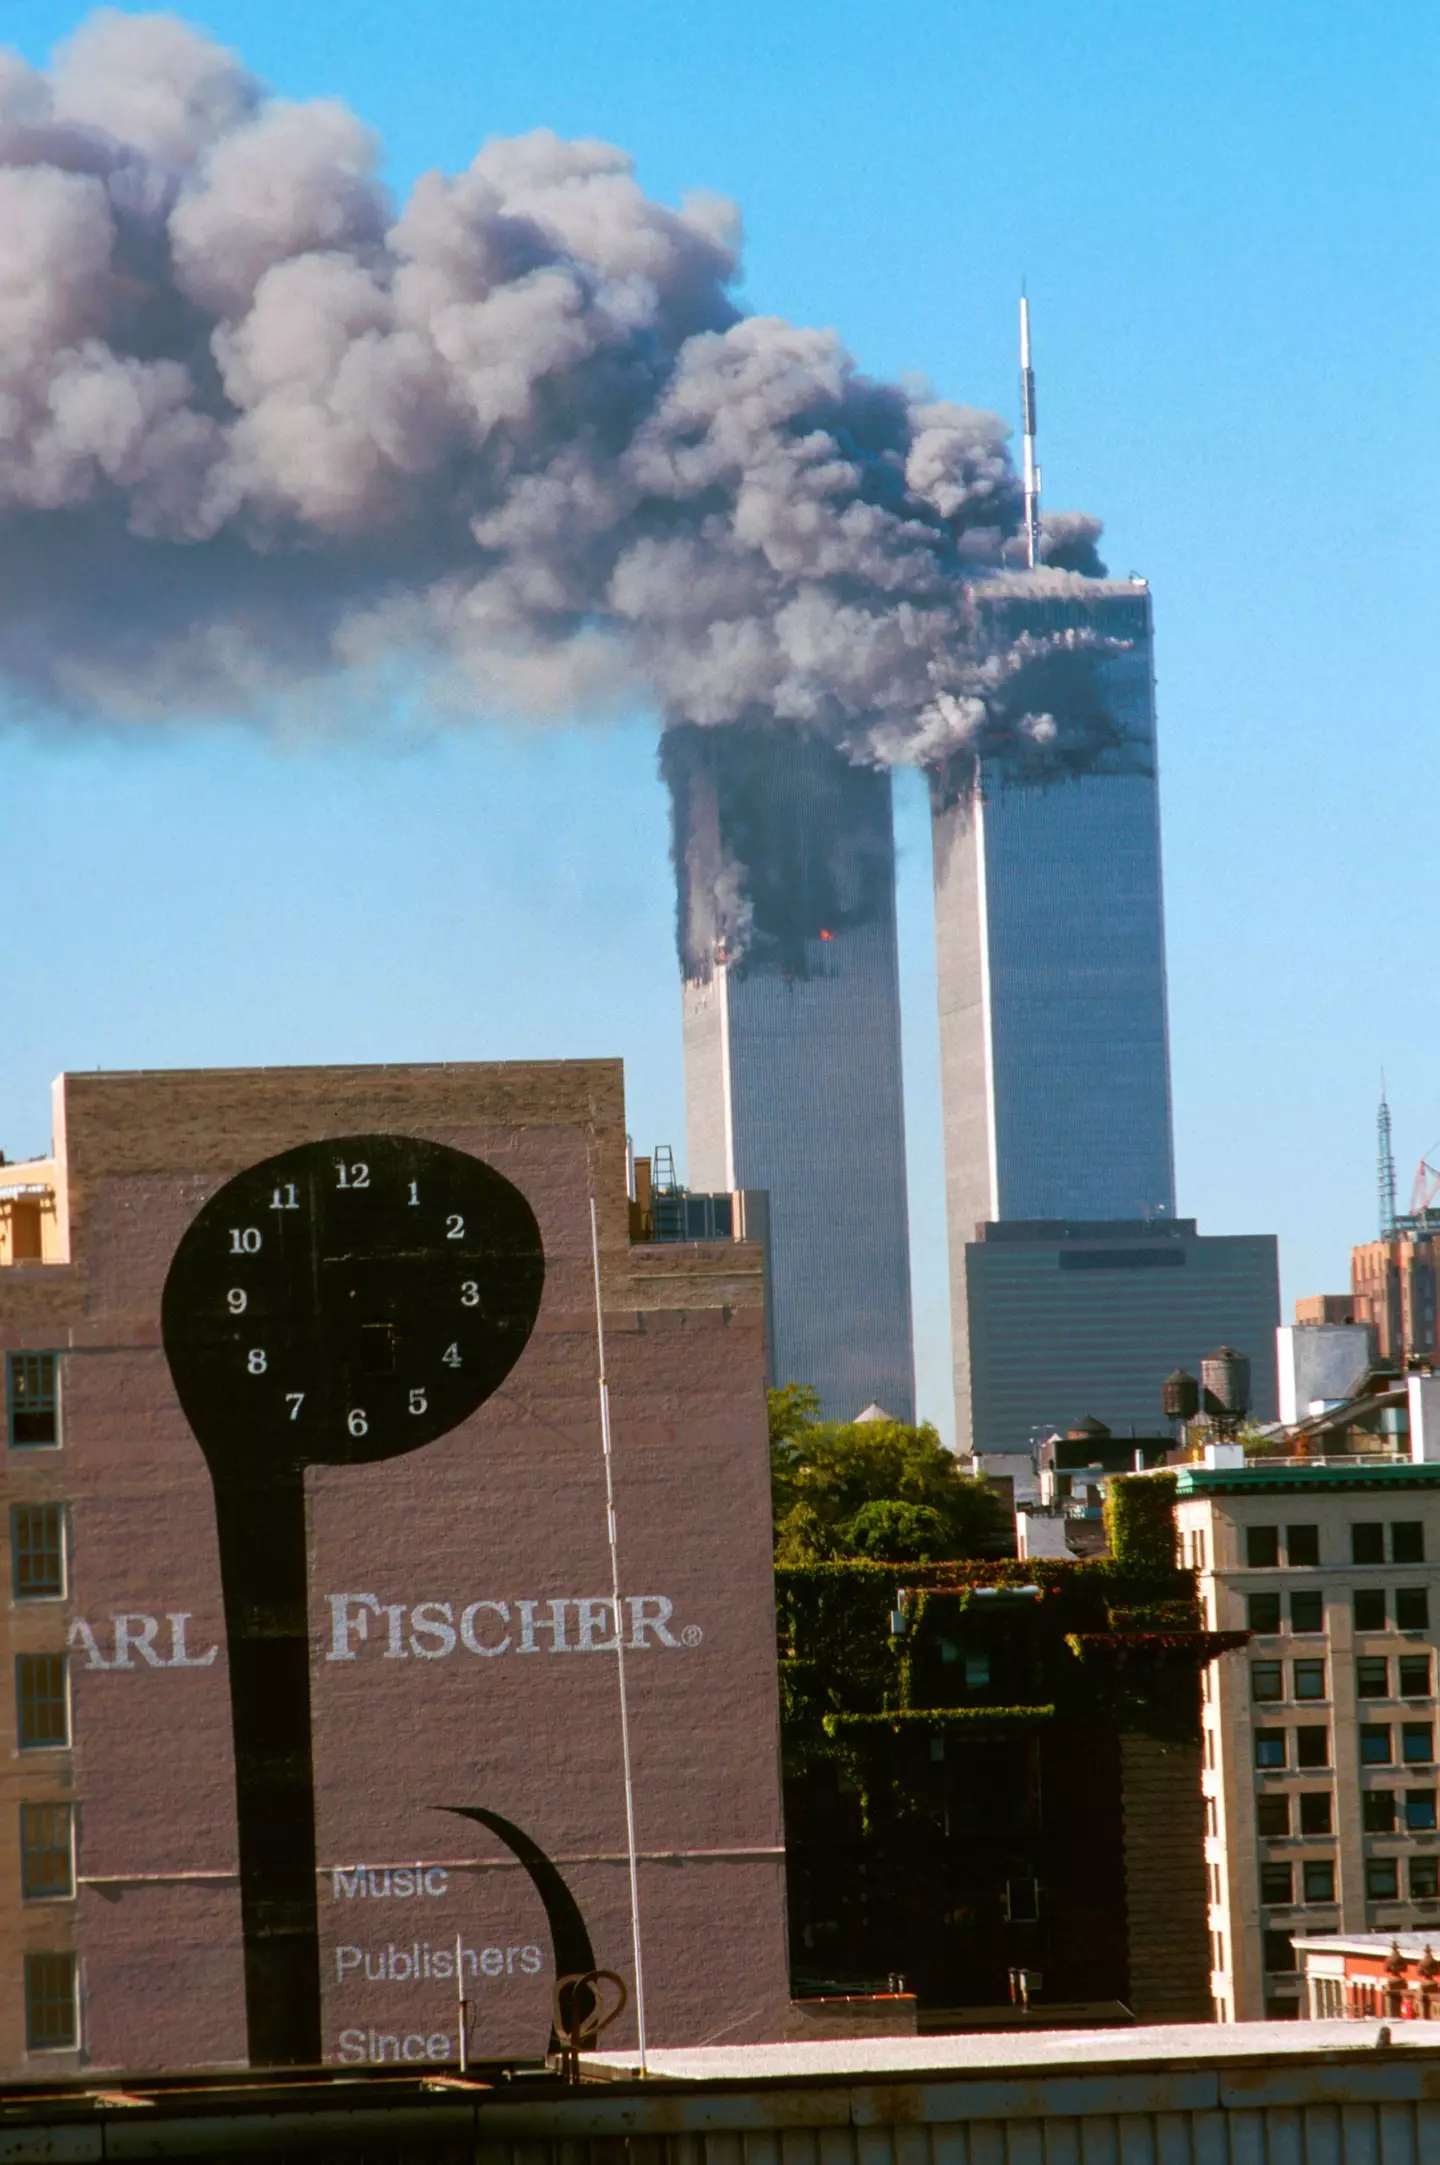 A total of 2,977 people lost their lives in the 9/11 attacks.